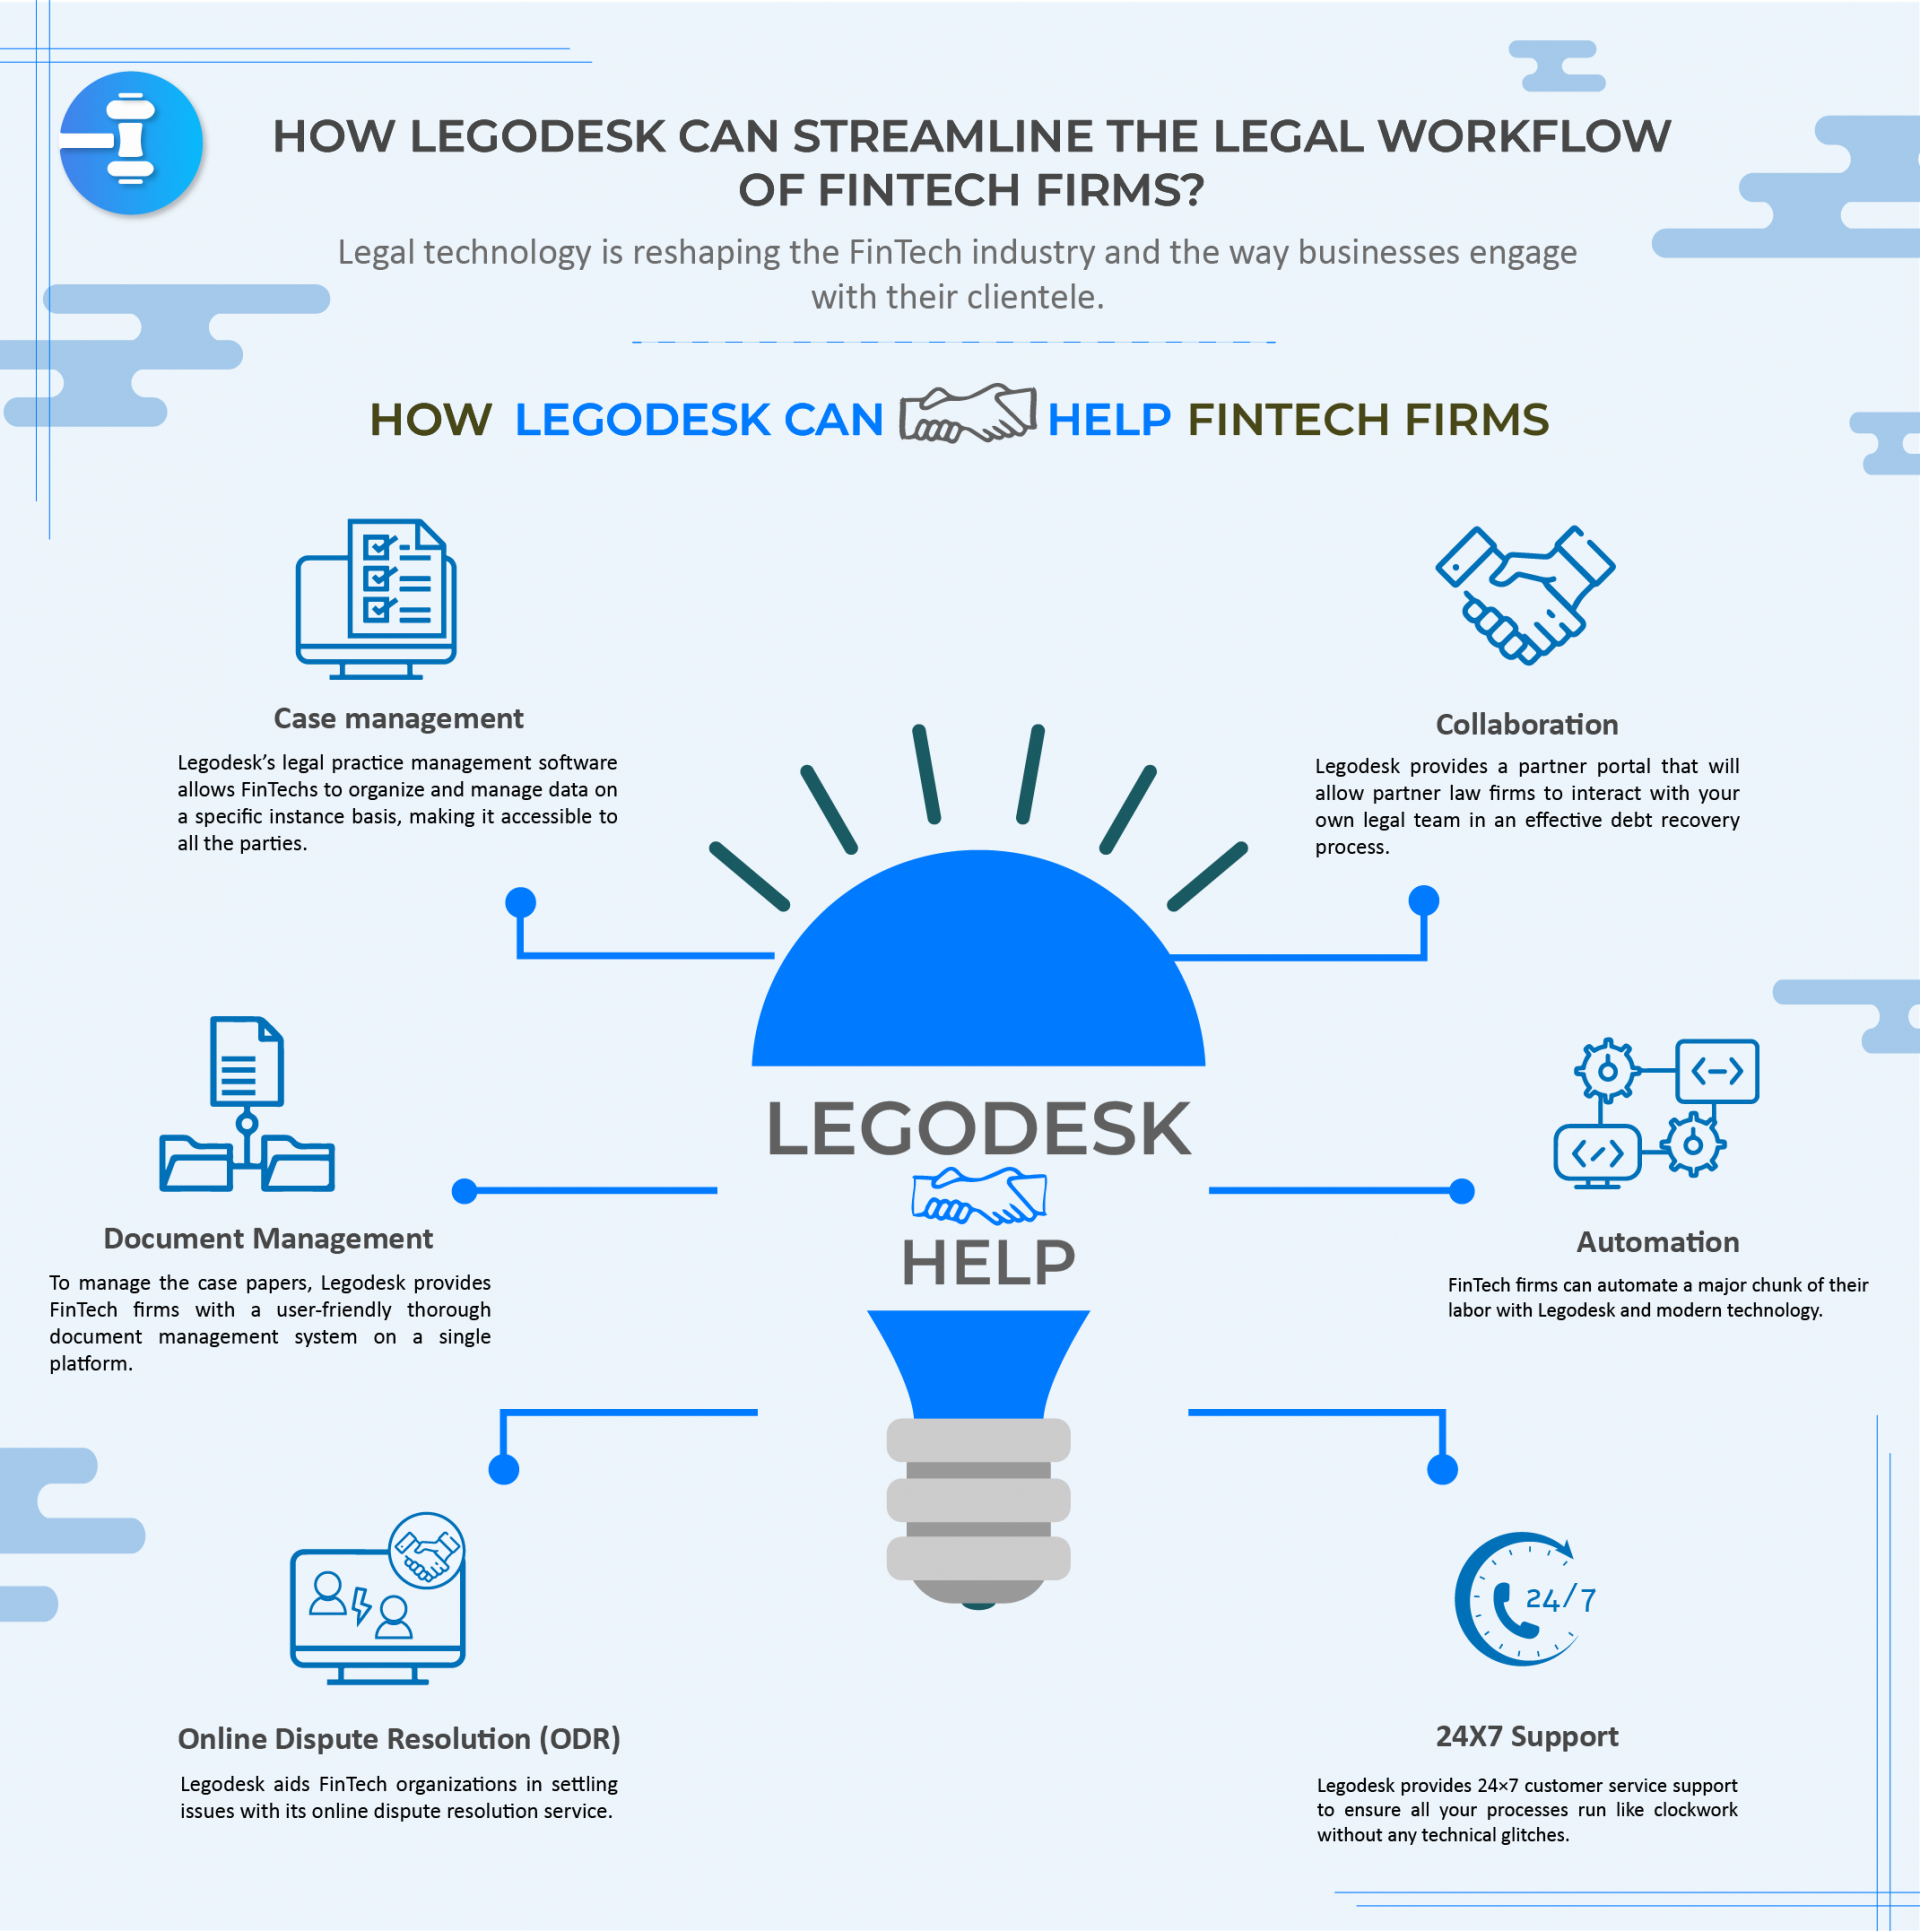 How Legodesk can streamline the legal workflow of FinTech firms